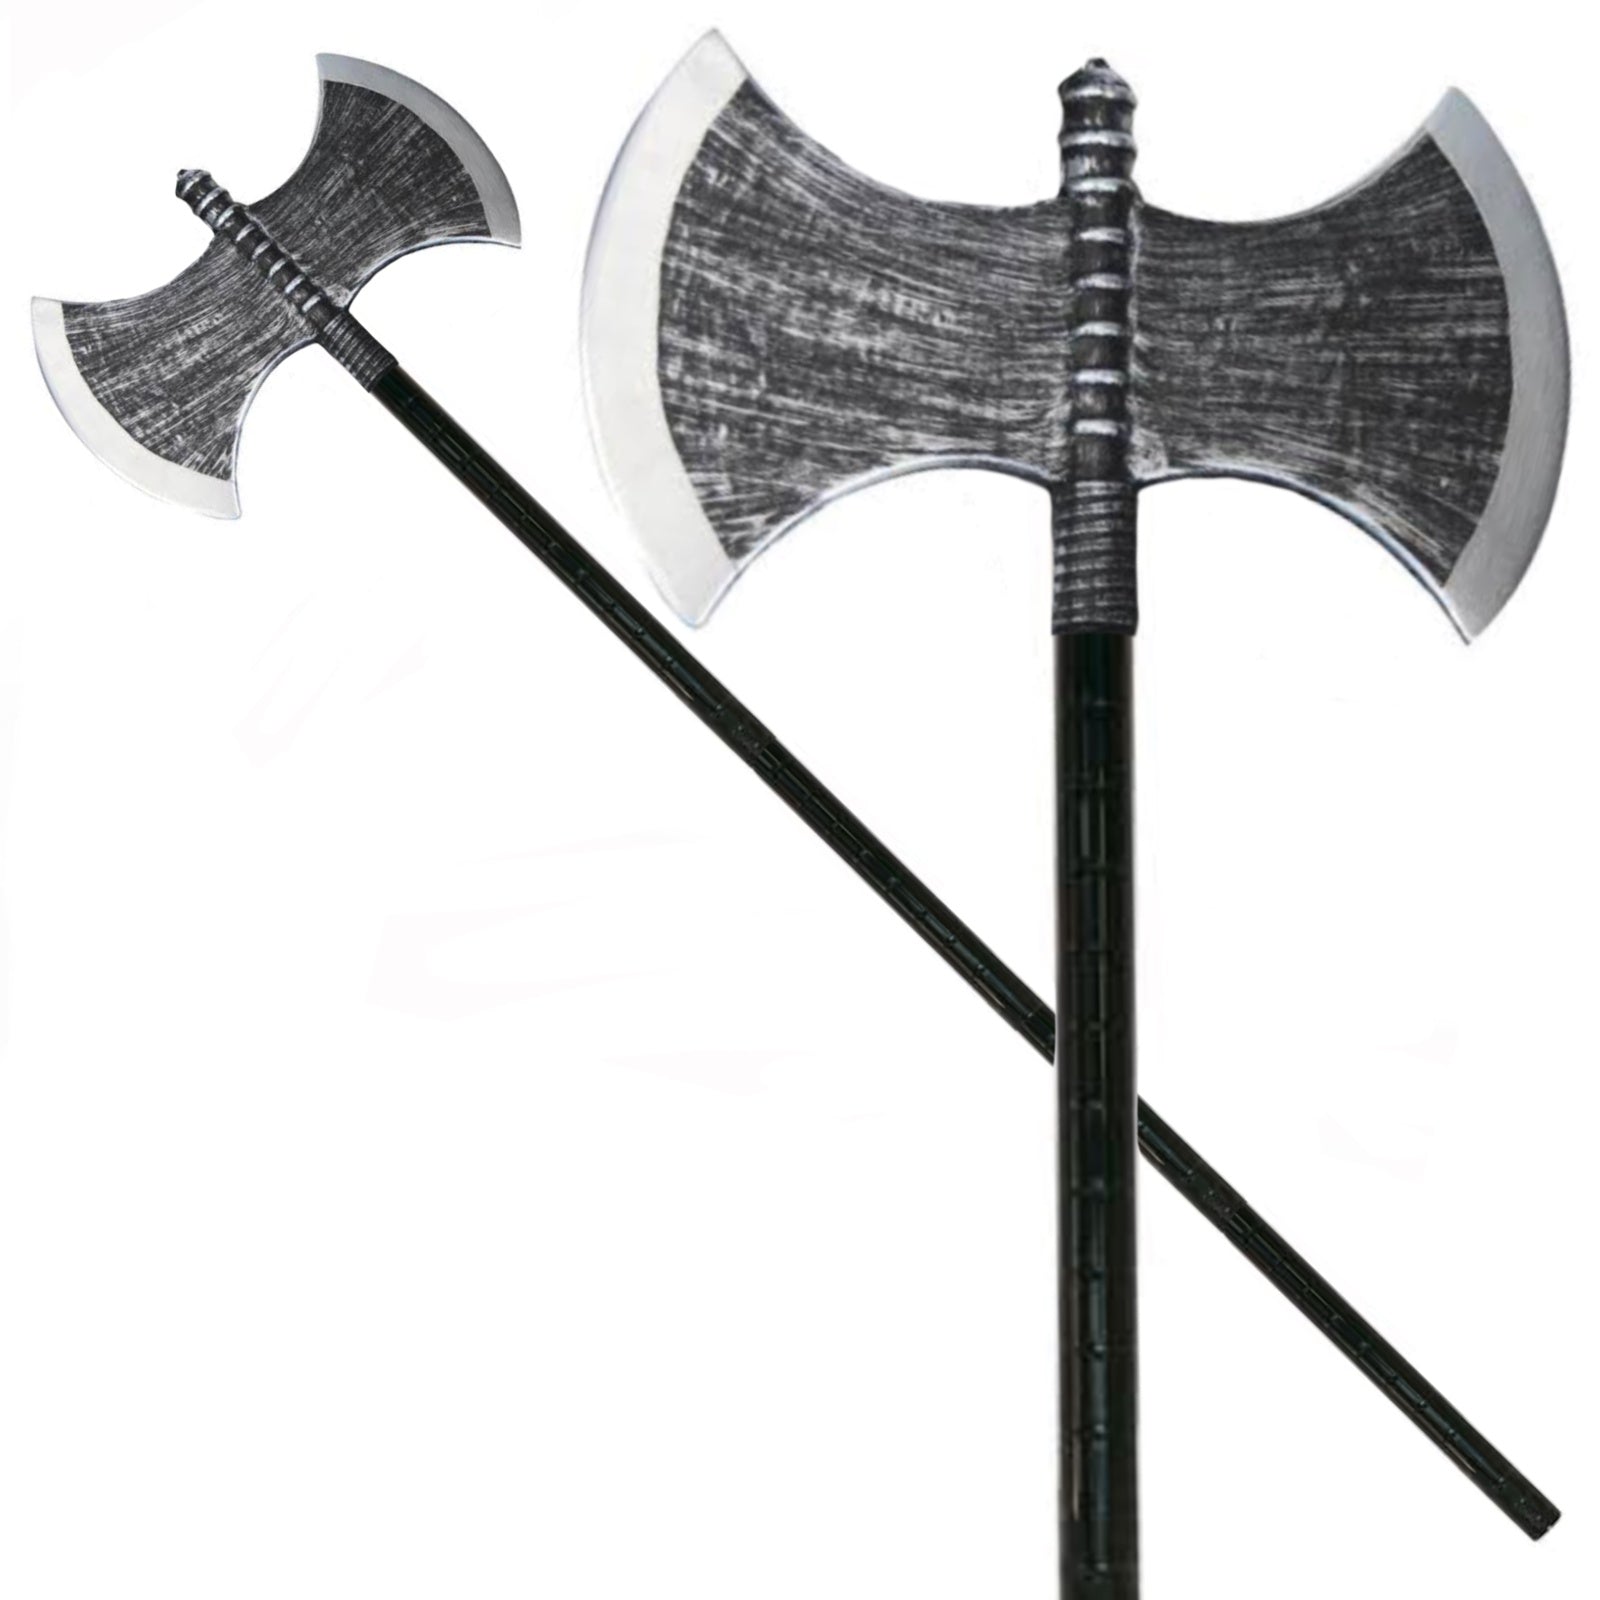 Collapsible Executioner's Axe - 4PC